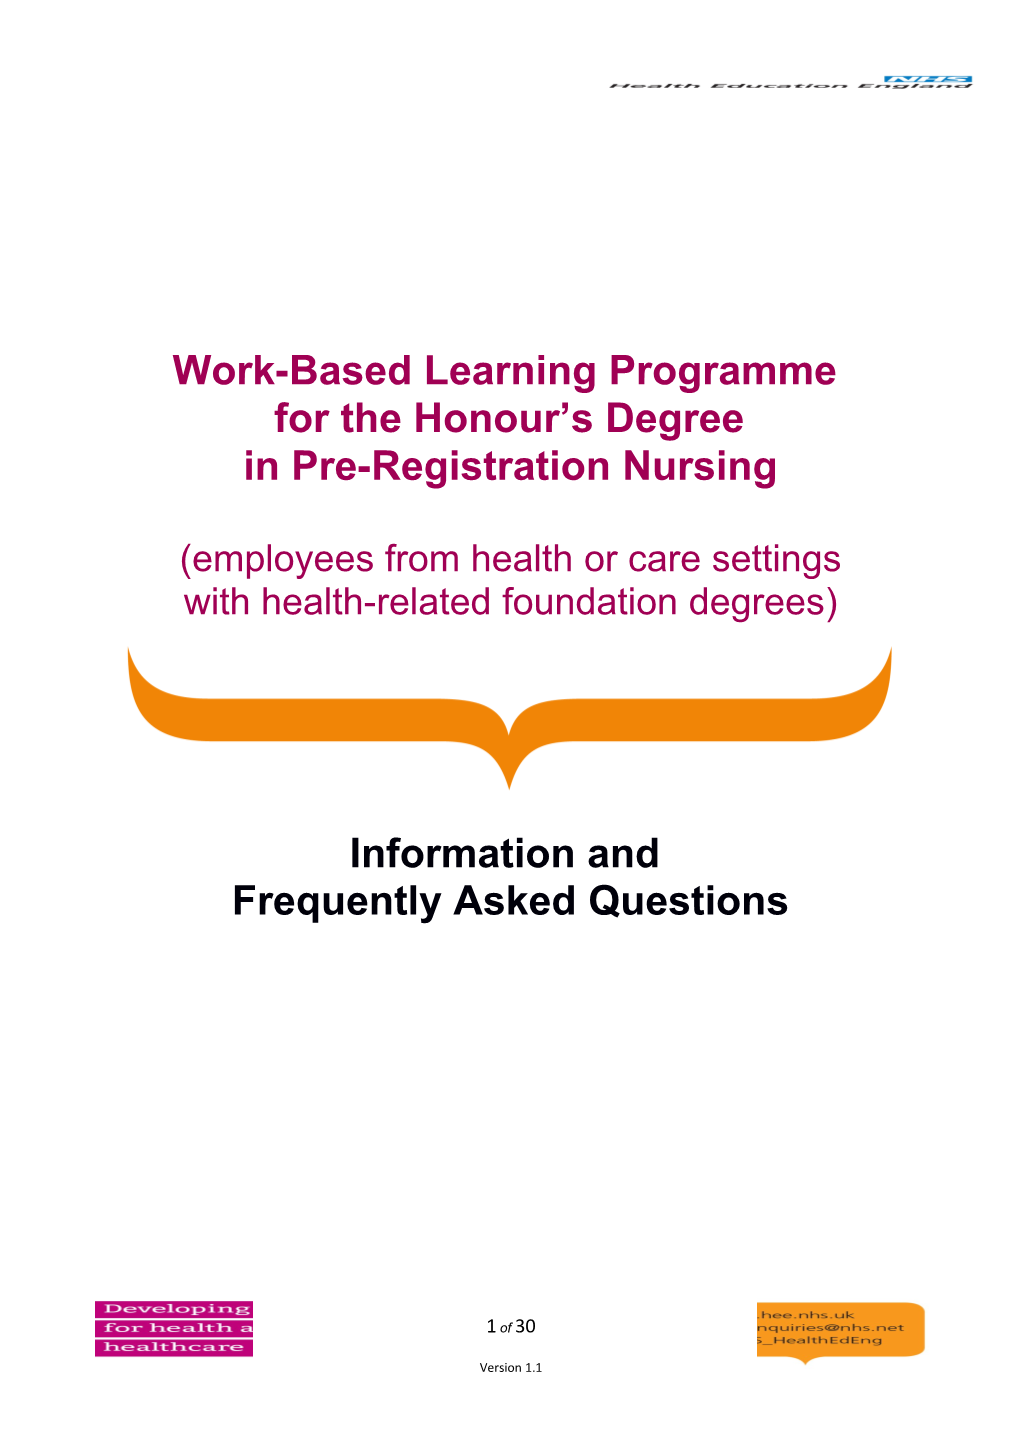 Information on the Work-Based Learning Routes Into Pre-Registration Nursing